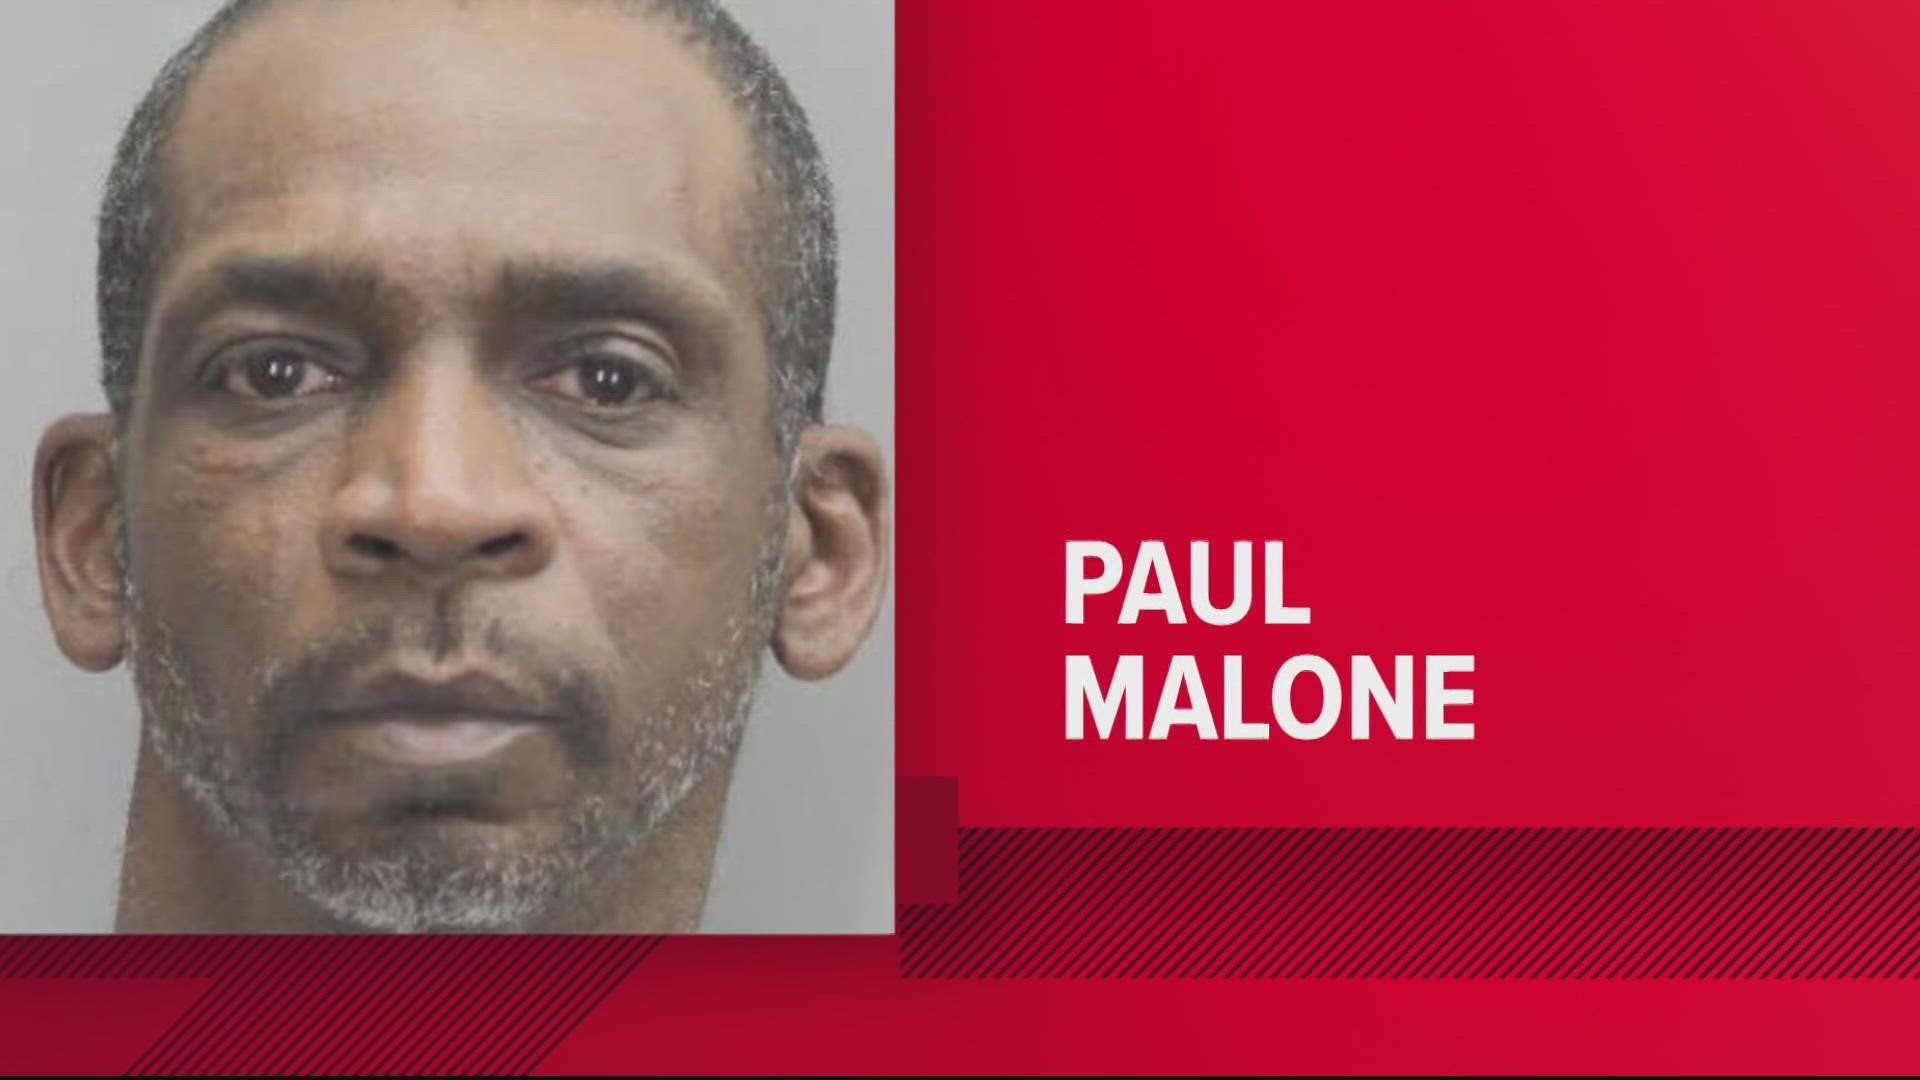 52-year-old Paul Malone of Alexandria.
Police say Malone and the victim got into an argument. Then he allegedly shot the other man multiple times and ran away.